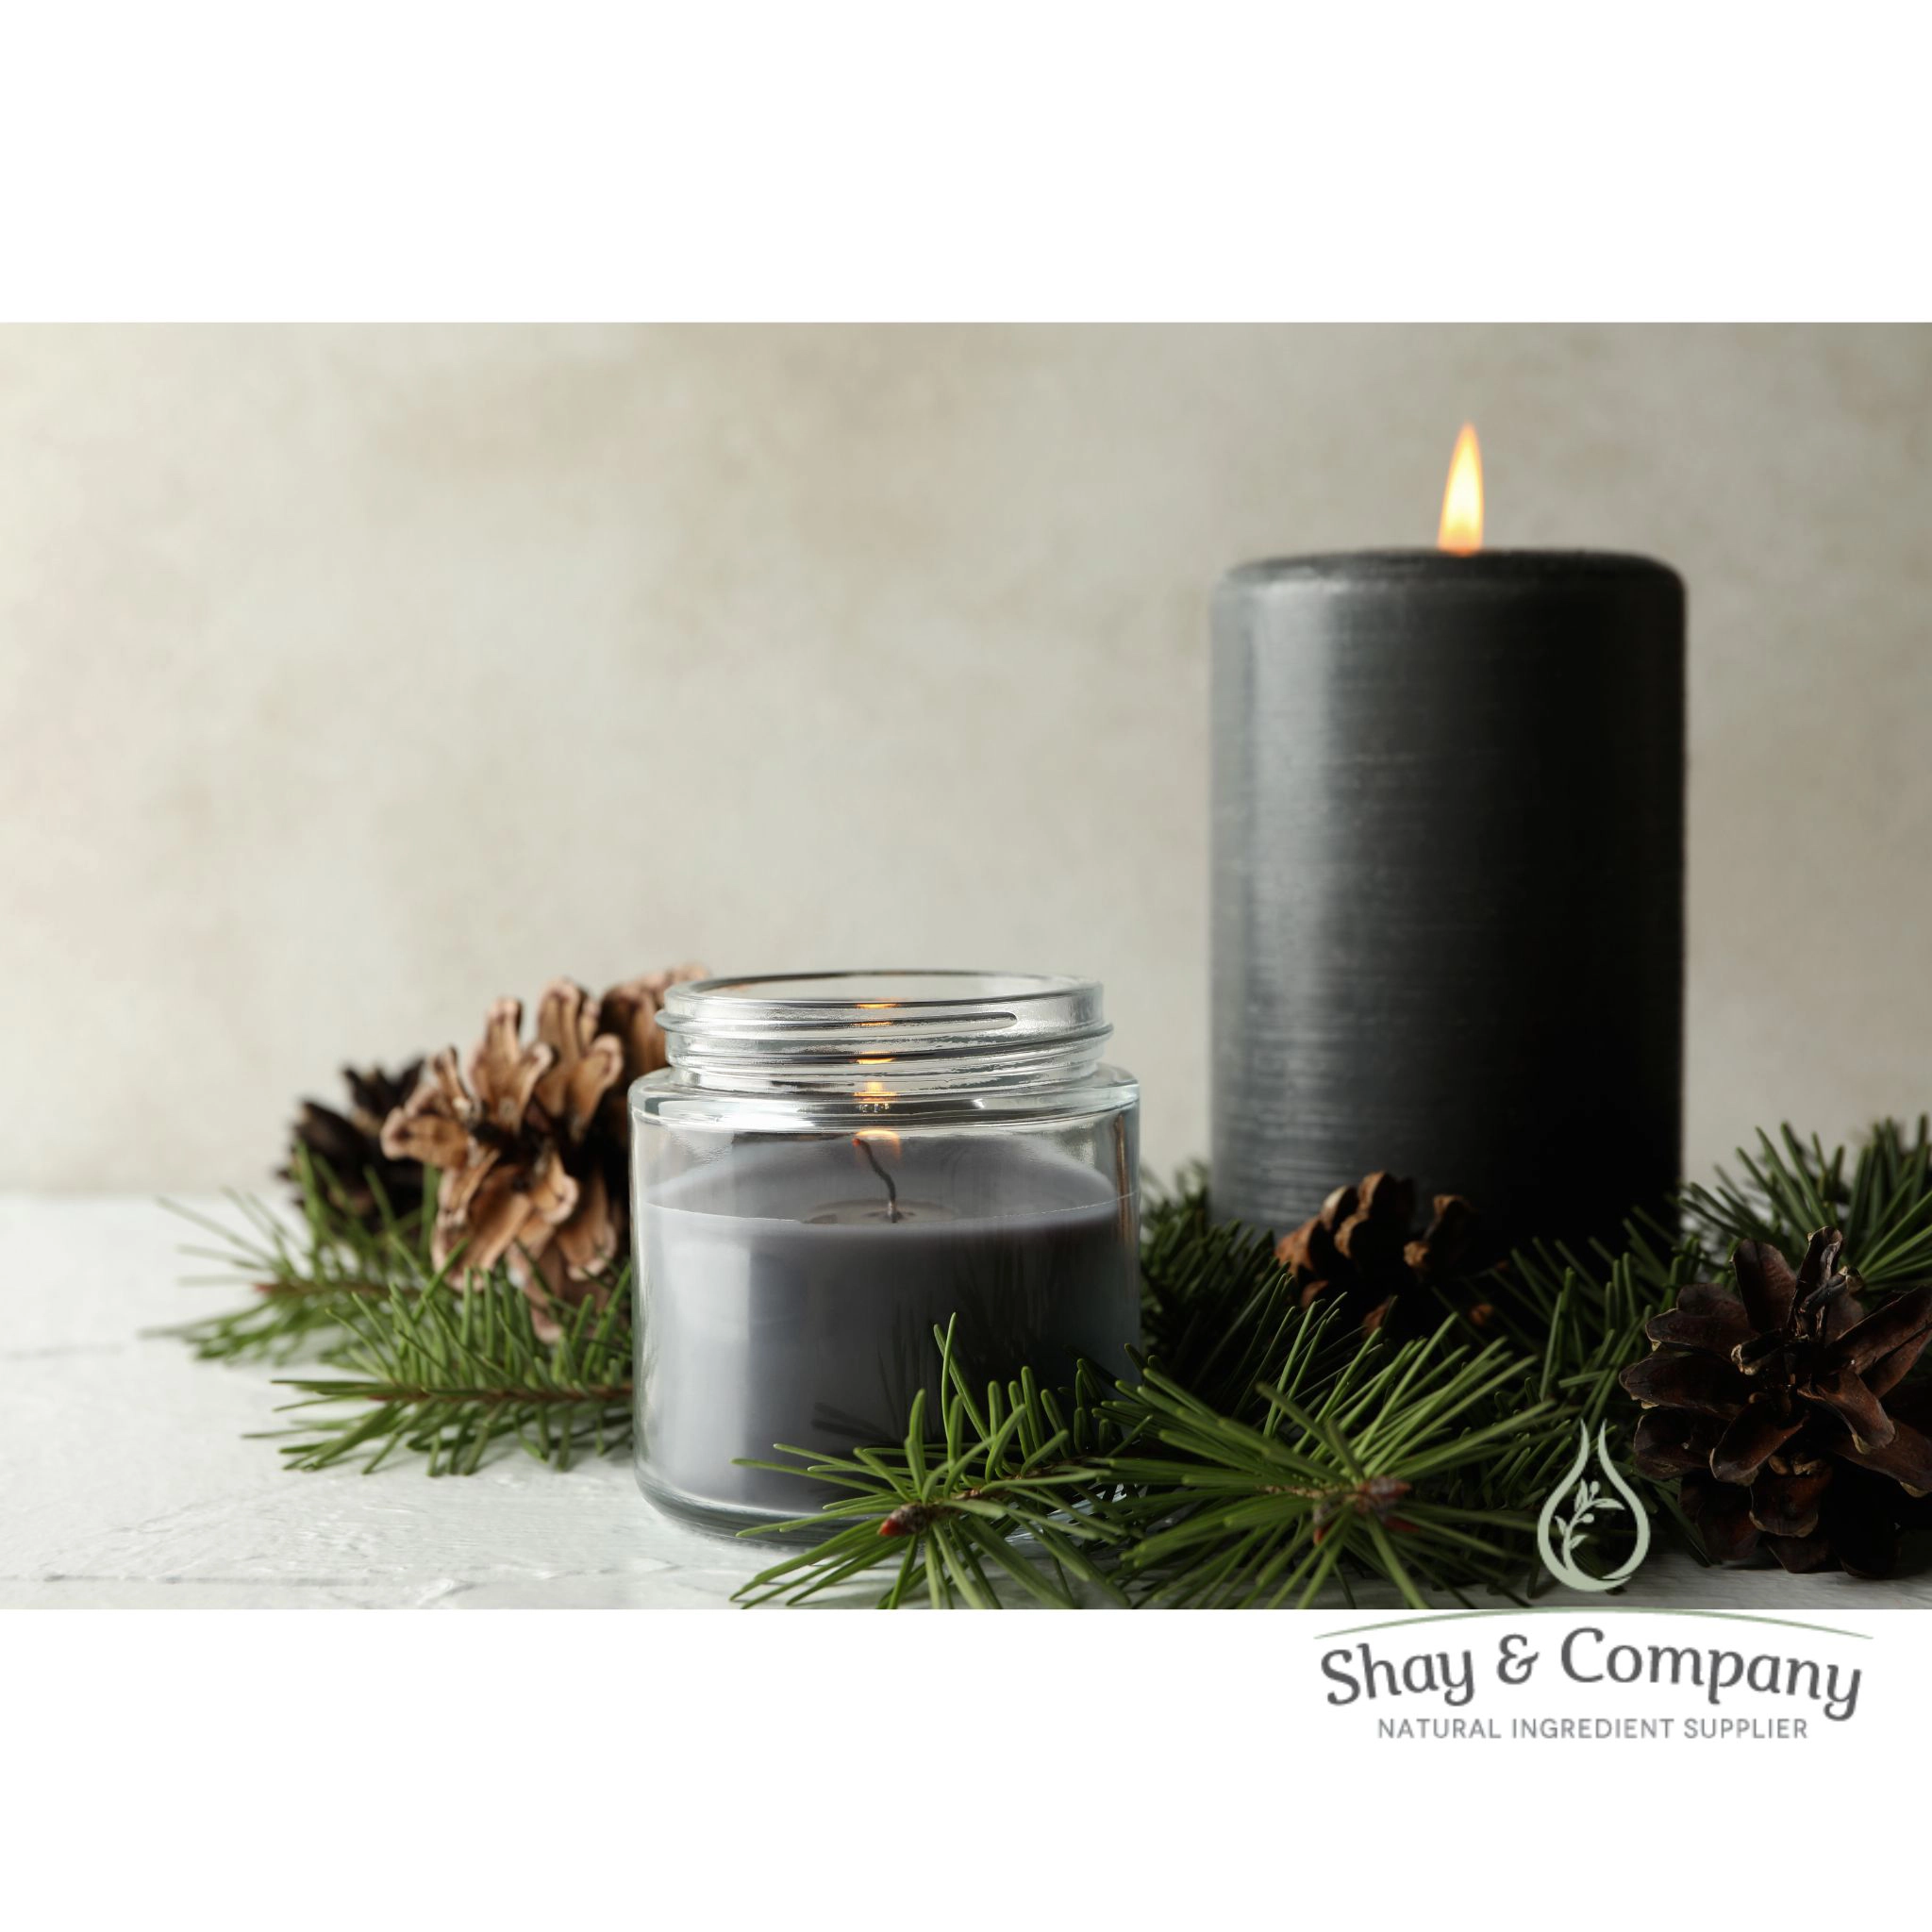 bayberry and pine fragrance for soap and candles